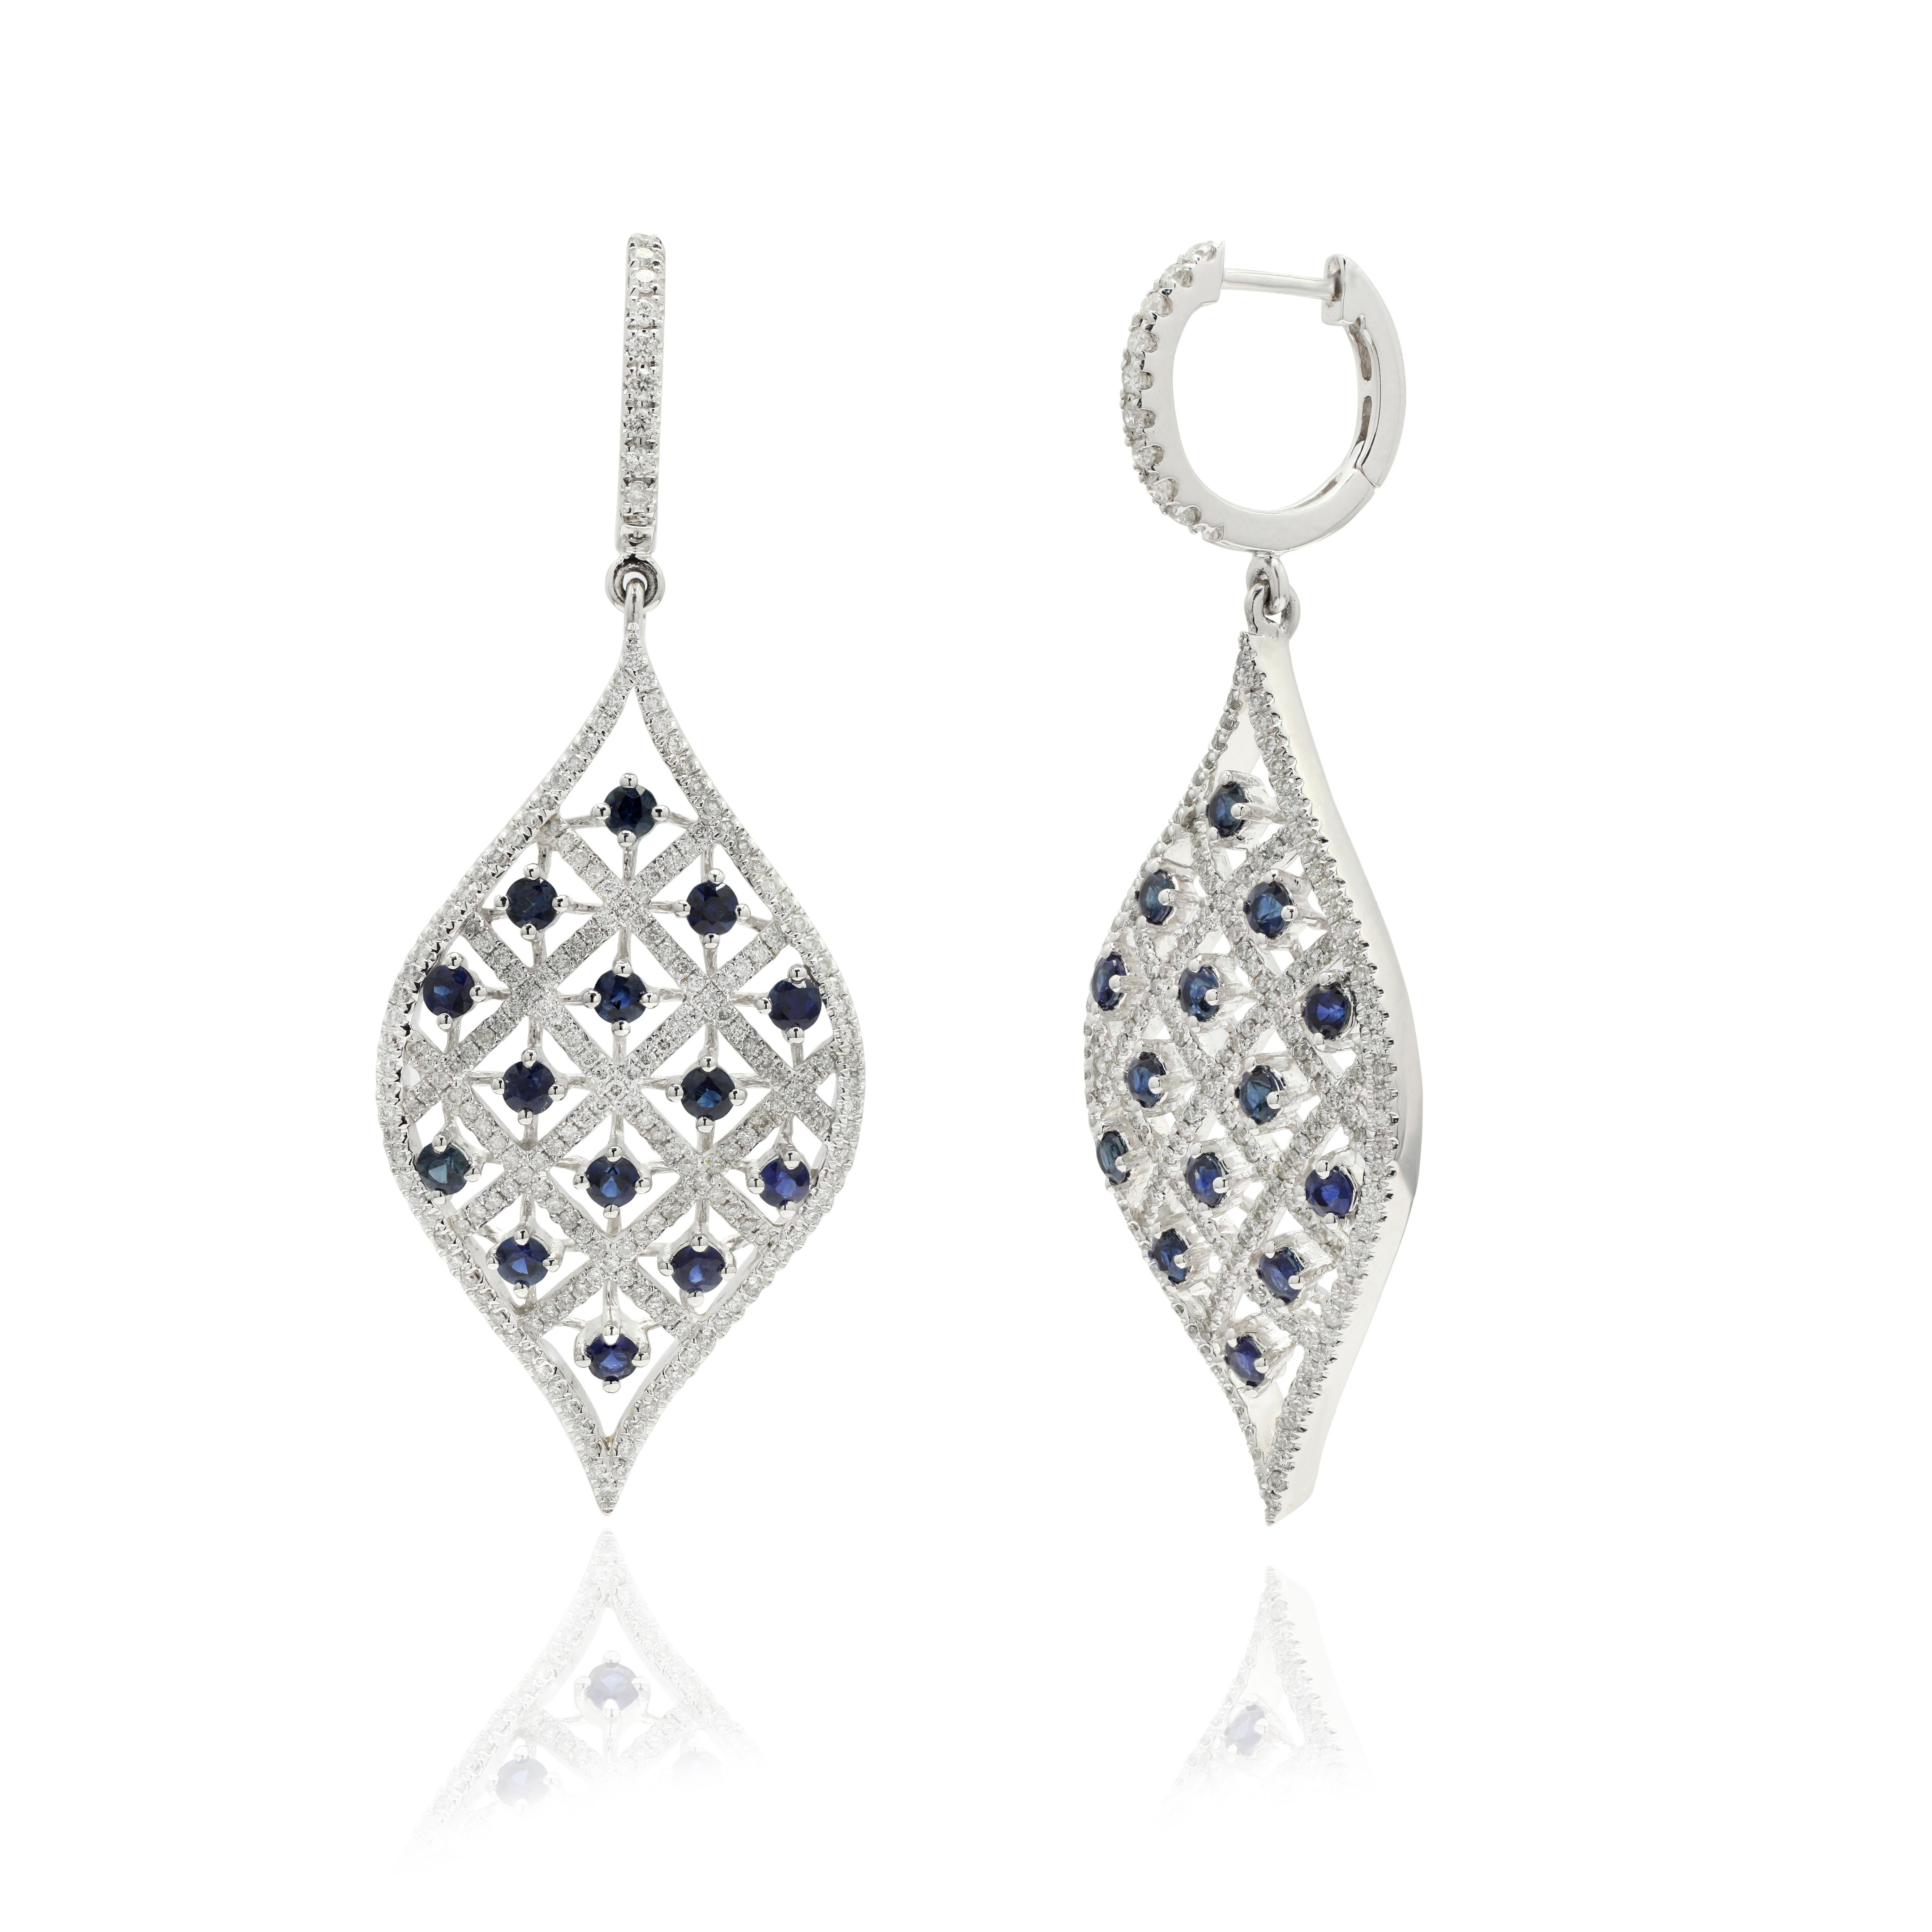 Designer Blue Sapphire and Diamond Long Dangle Earrings to make a statement with your look. These earrings create a sparkling, luxurious look featuring oval cut gemstone.
If you love to gravitate towards unique styles, this piece of jewelry is